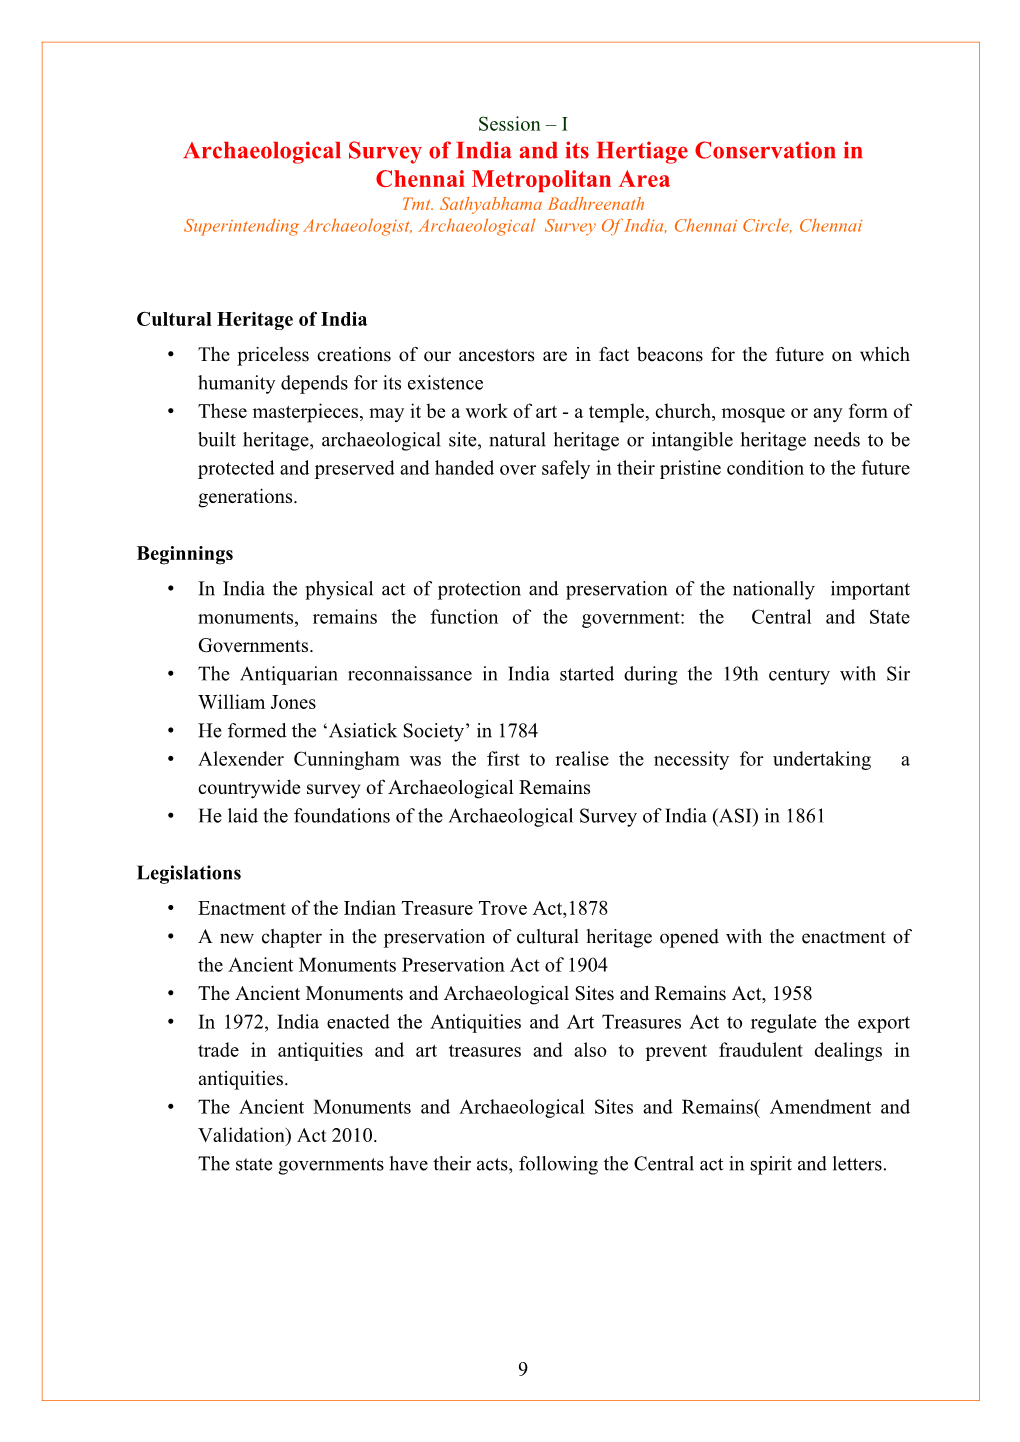 Archaeological Survey of India and Its Heritage Conservation In